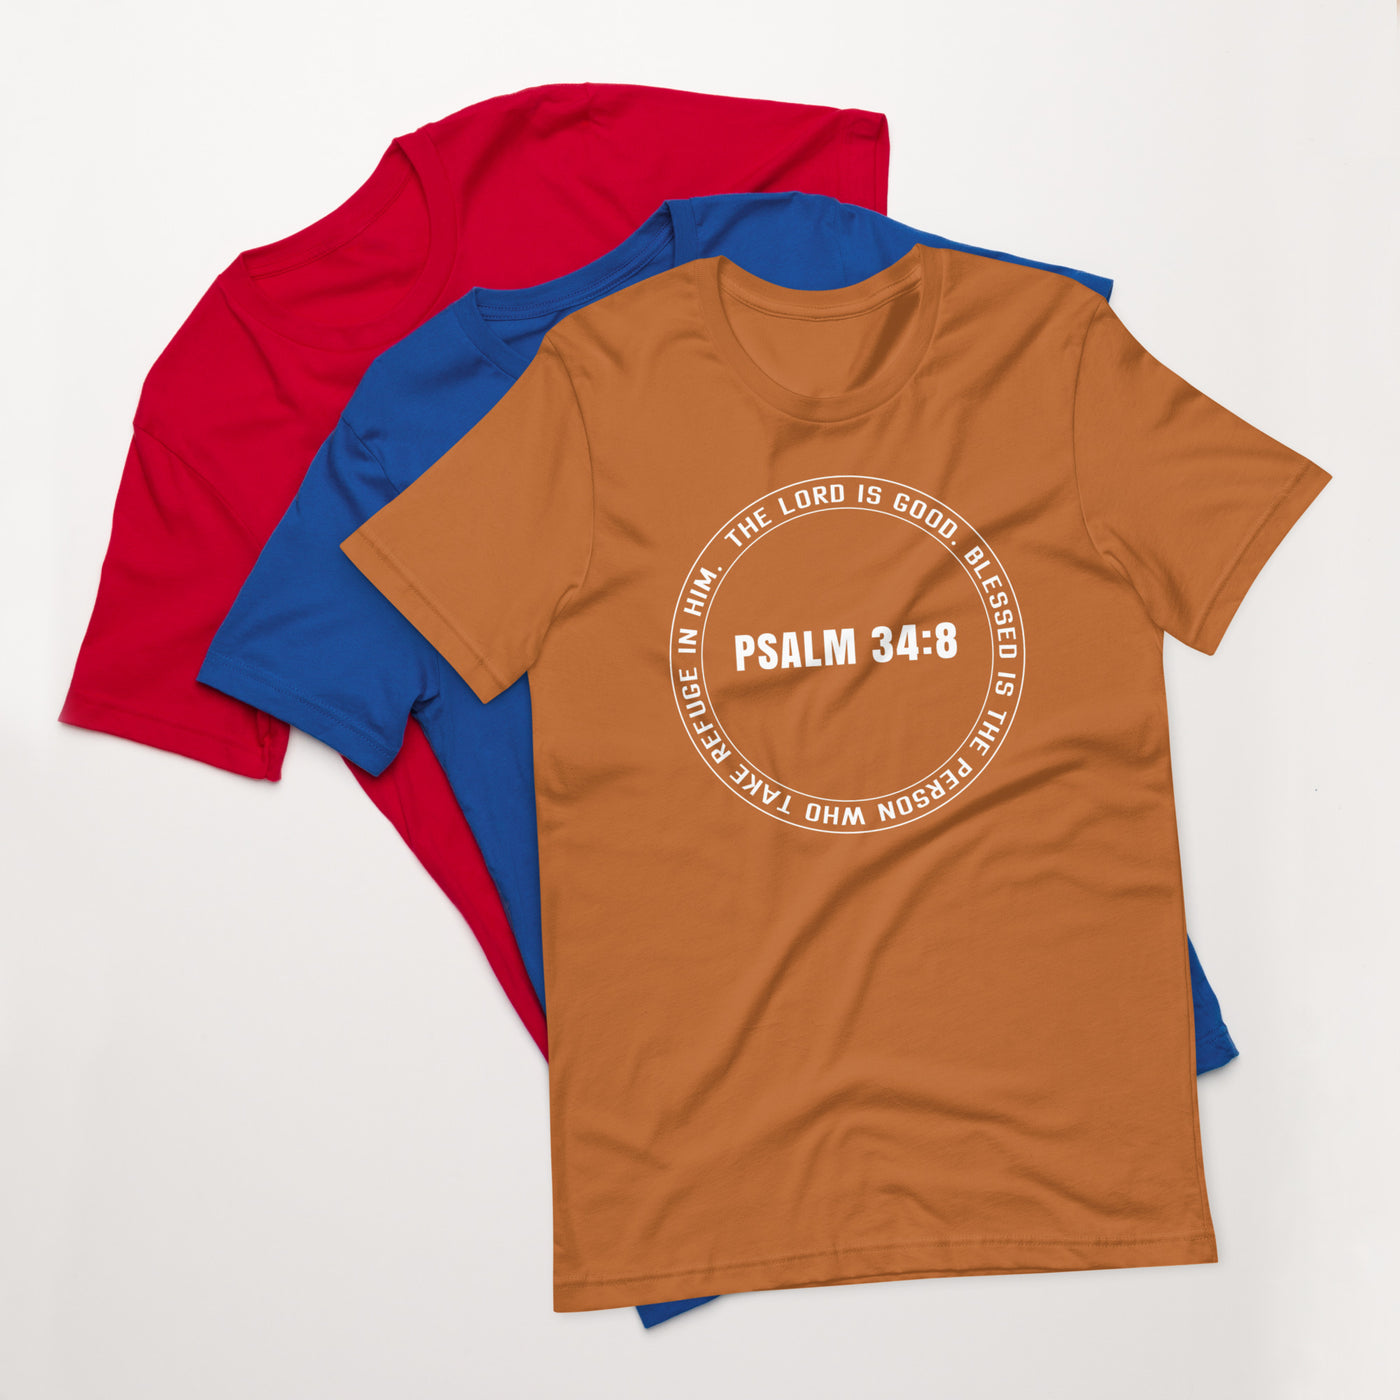 F&H Christian The Lord is Good Women's T-Shirt - Faith and Happiness Store